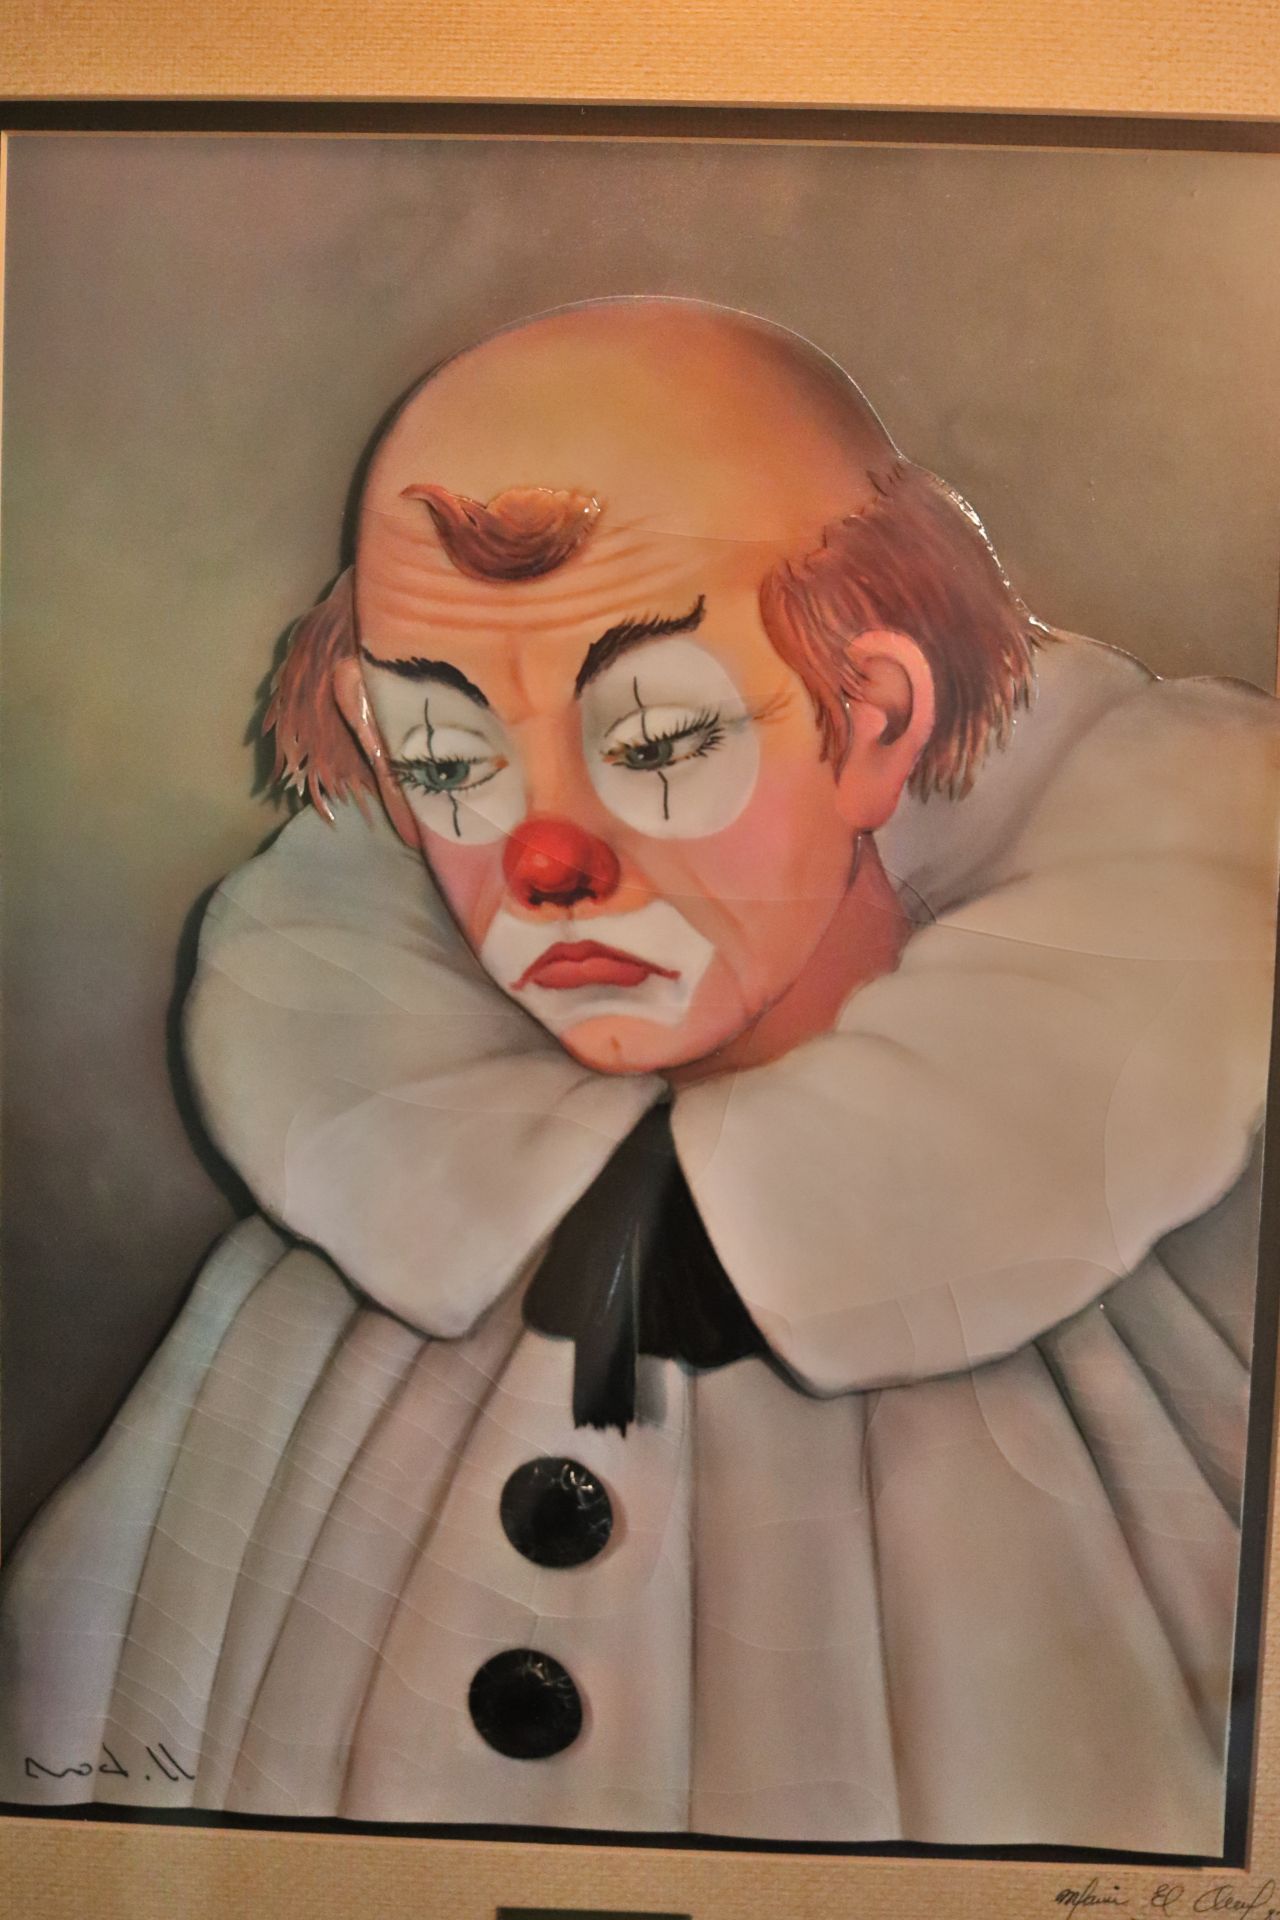 Framed mixed media art piece depicting a clown, unknown artist, dated '87, approximate size 16" x 12 - Image 2 of 6